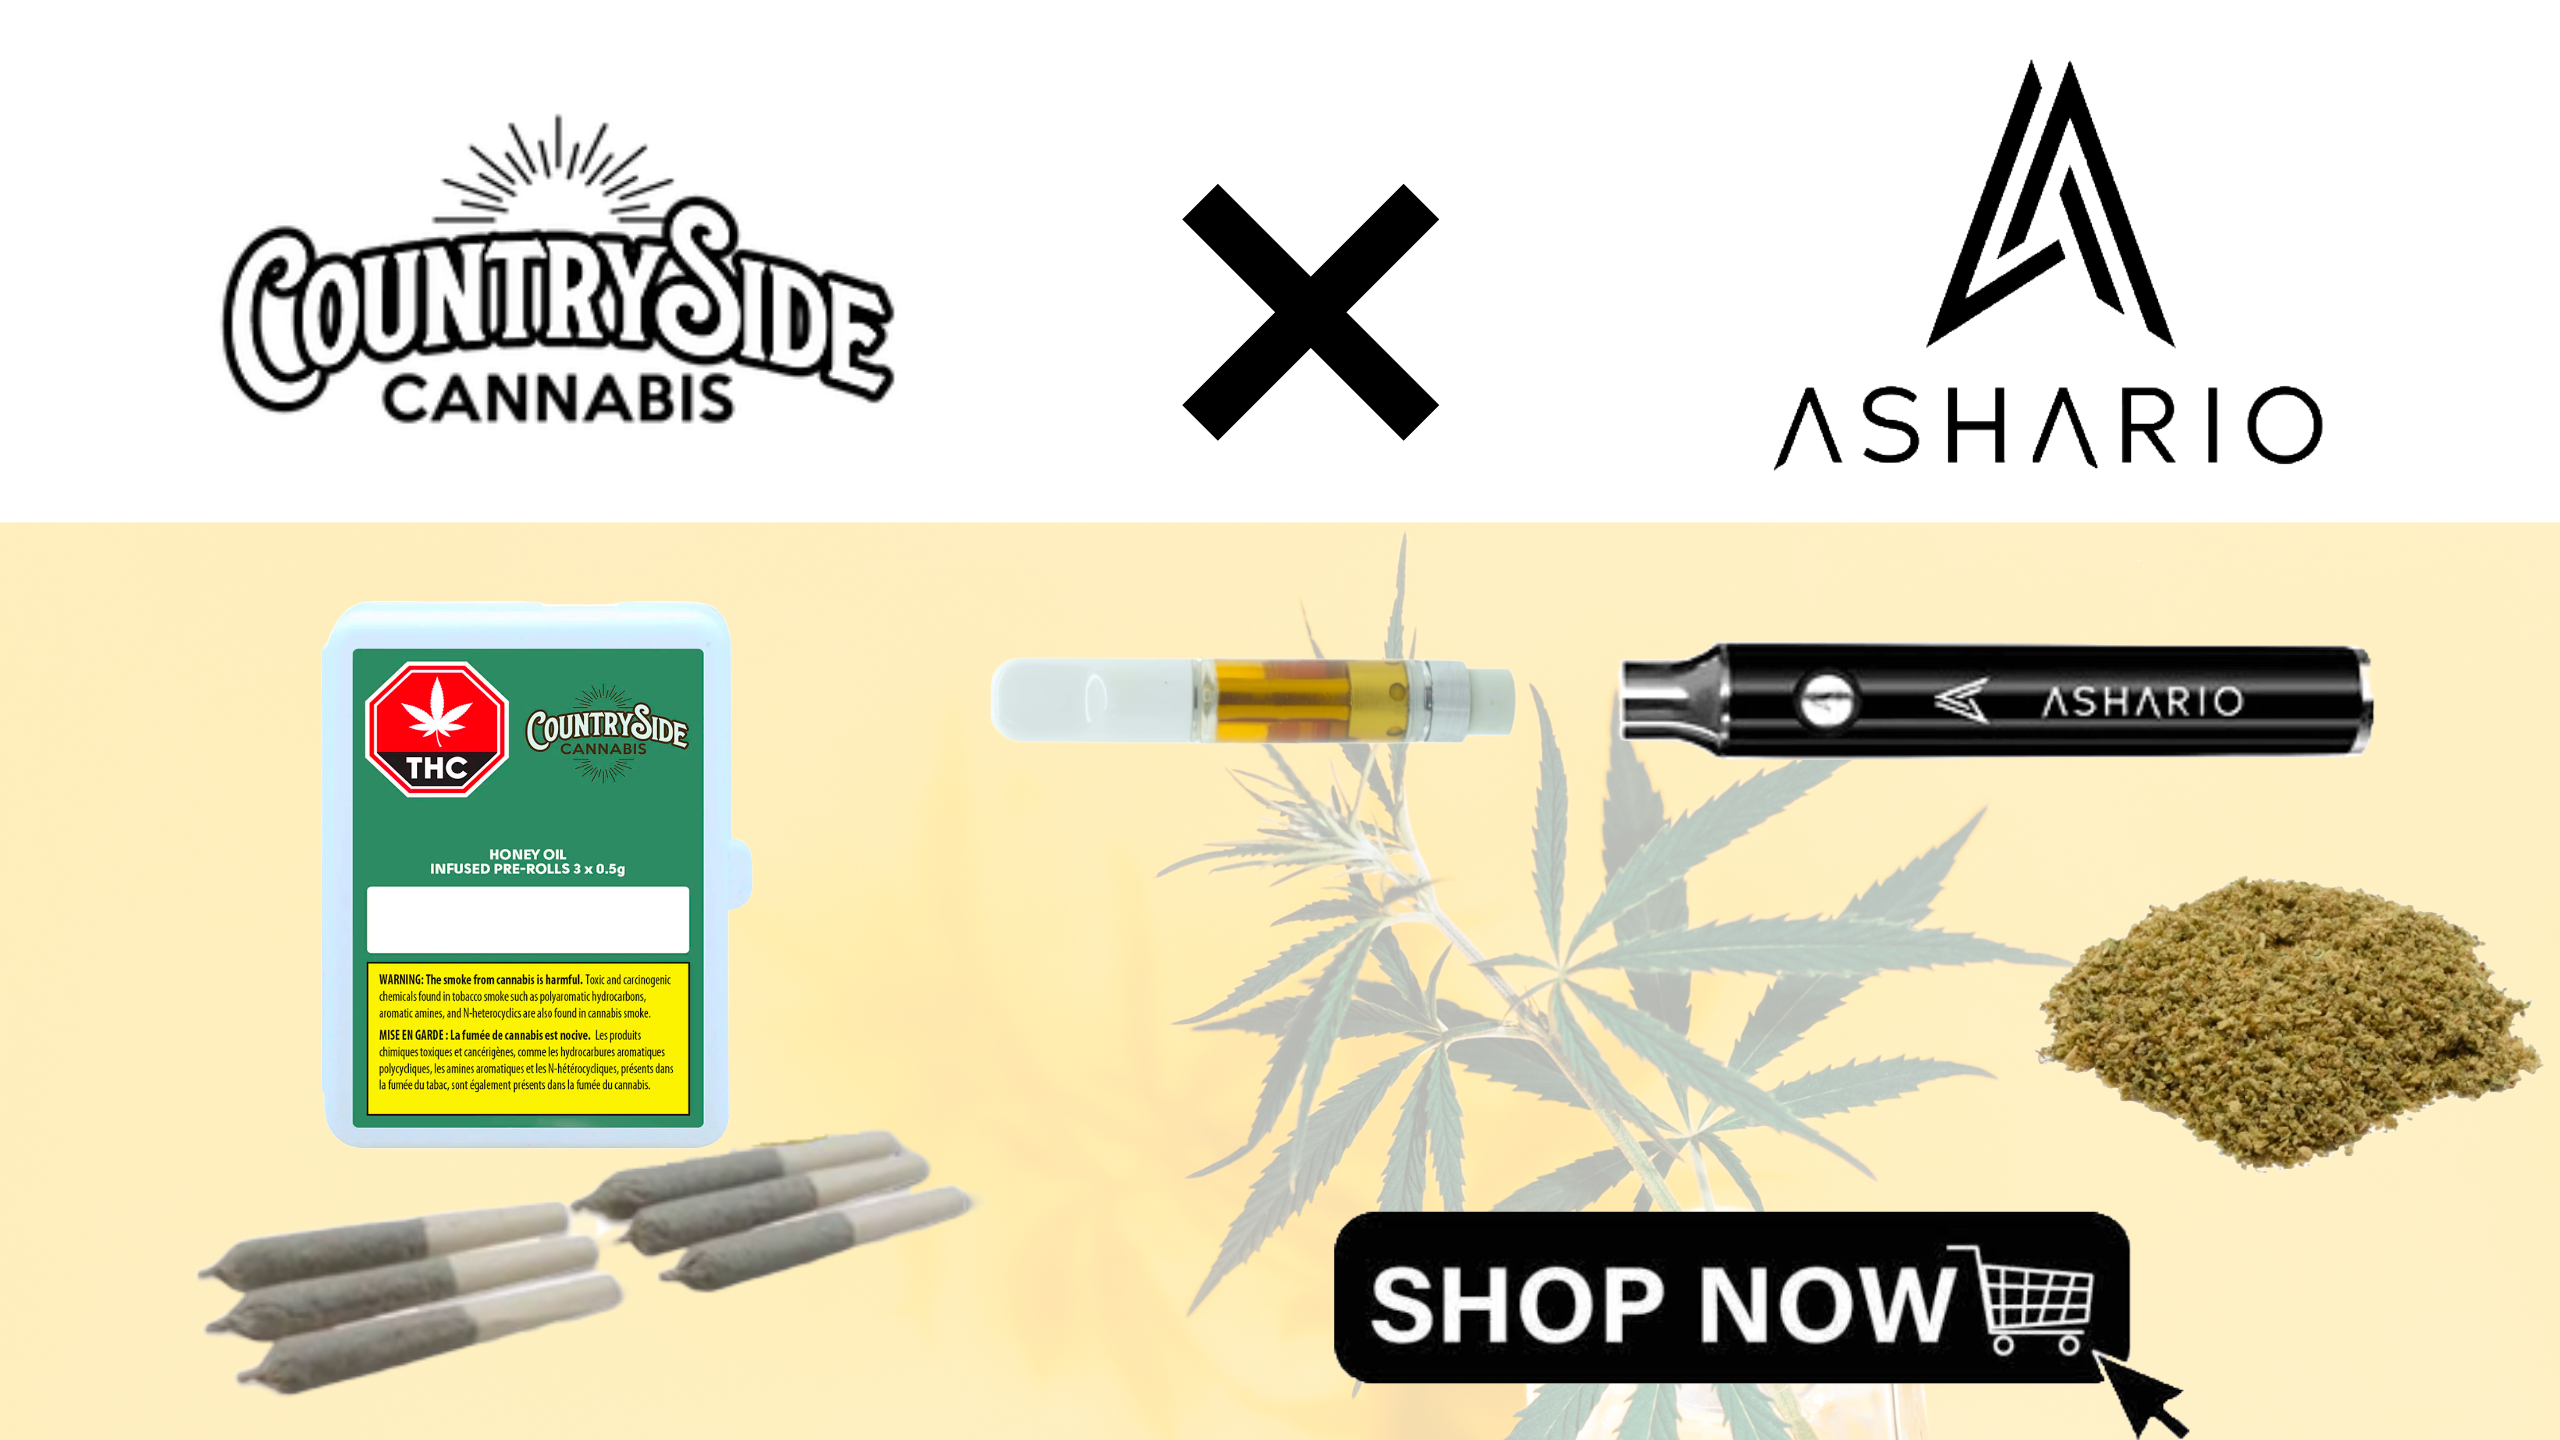 Delve into a world of premium cannabis products with Countryside Cannabis, recognized as Canada's foremost destination for top-tier vape carts and pre-rolls, now available at Ashario.